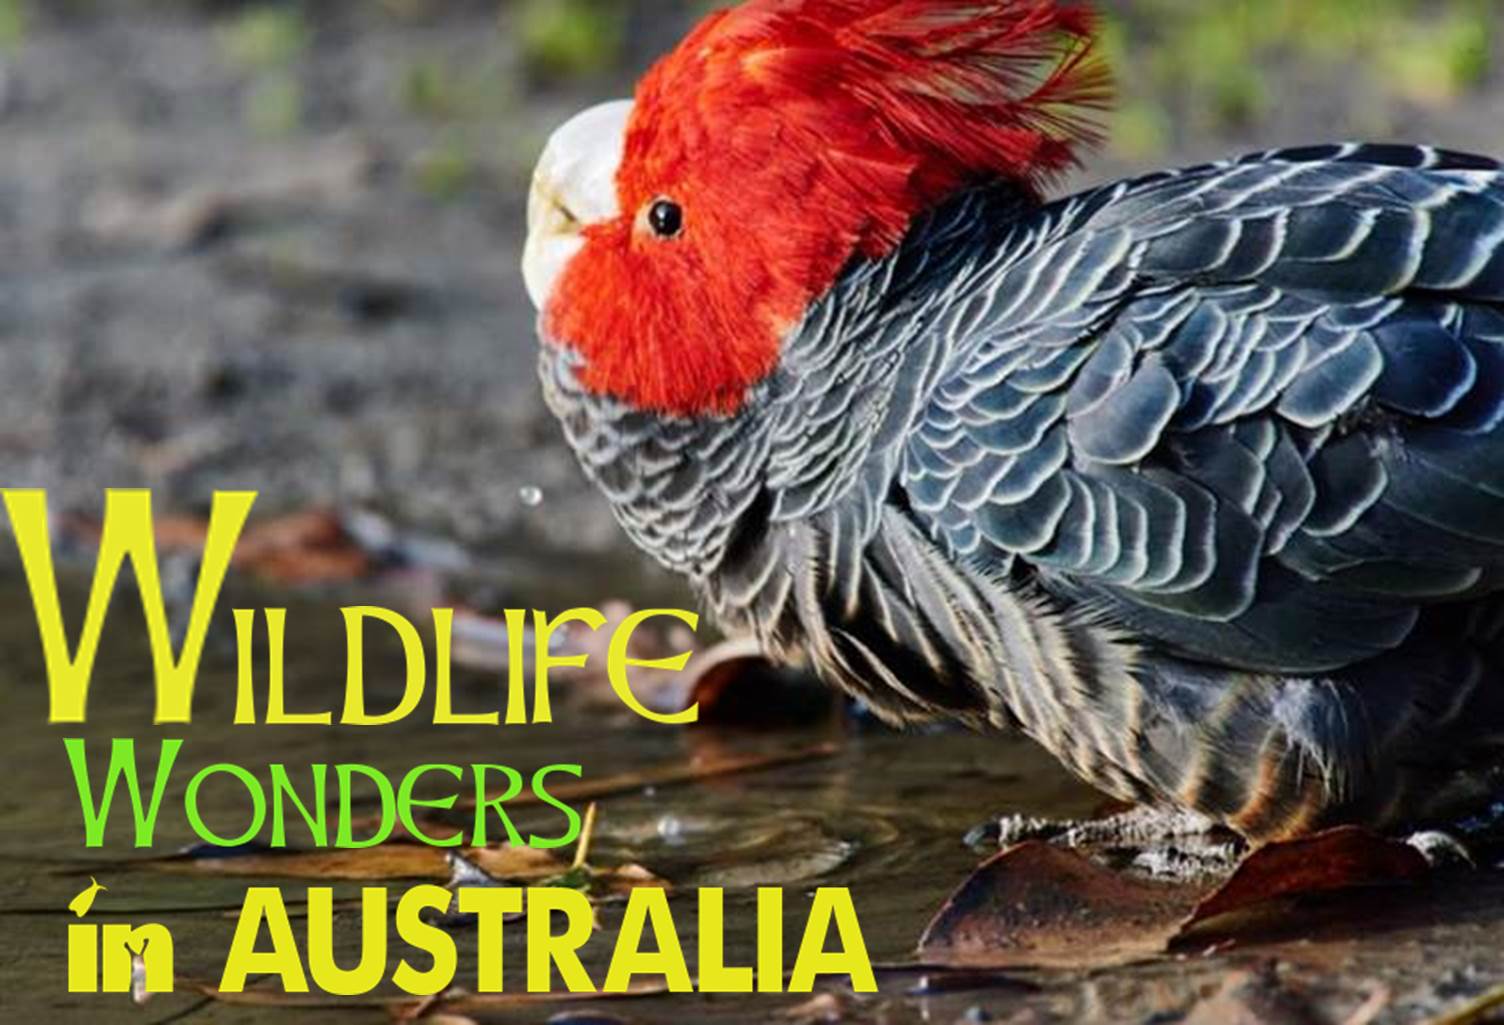 [PHOTOS/VIDEO] WILDLIFE WONDERS in Australia - Wild side of the Great Ocean Road is the new ecotourism attraction